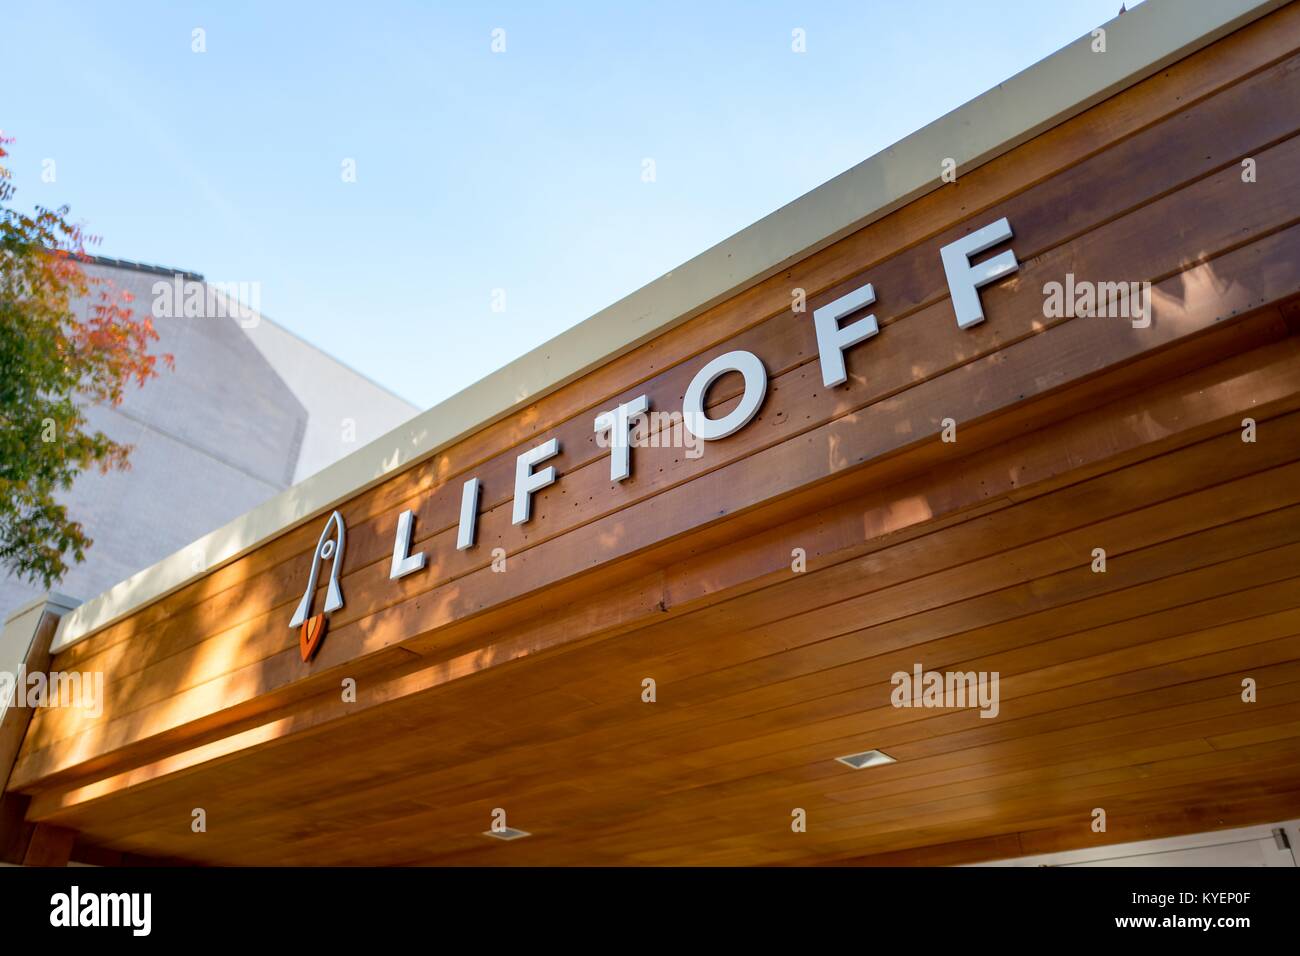 Facade with sign and logo at headquarters of mobile app company Liftoff in Silicon Valley, Palo Alto, California, November 14, 2017. () Stock Photo